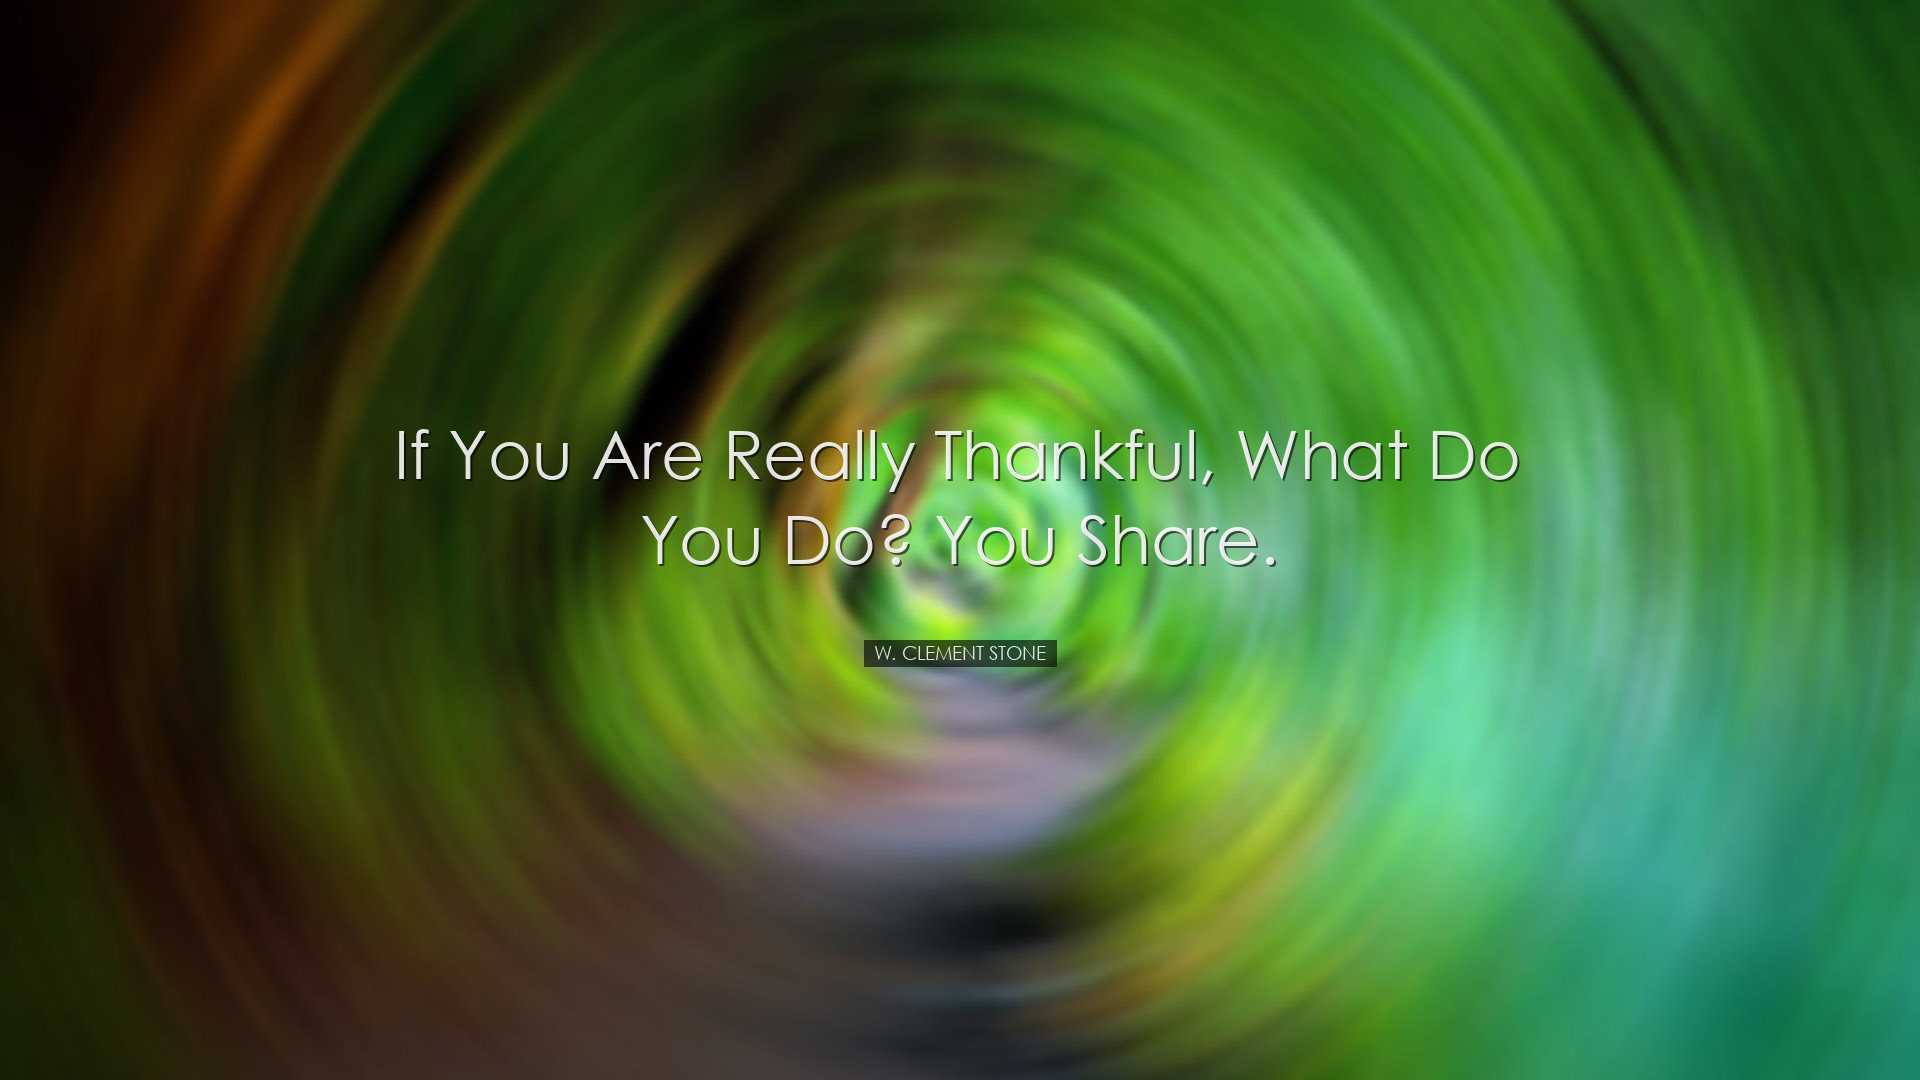 If you are really thankful, what do you do? You share. - W. Clemen